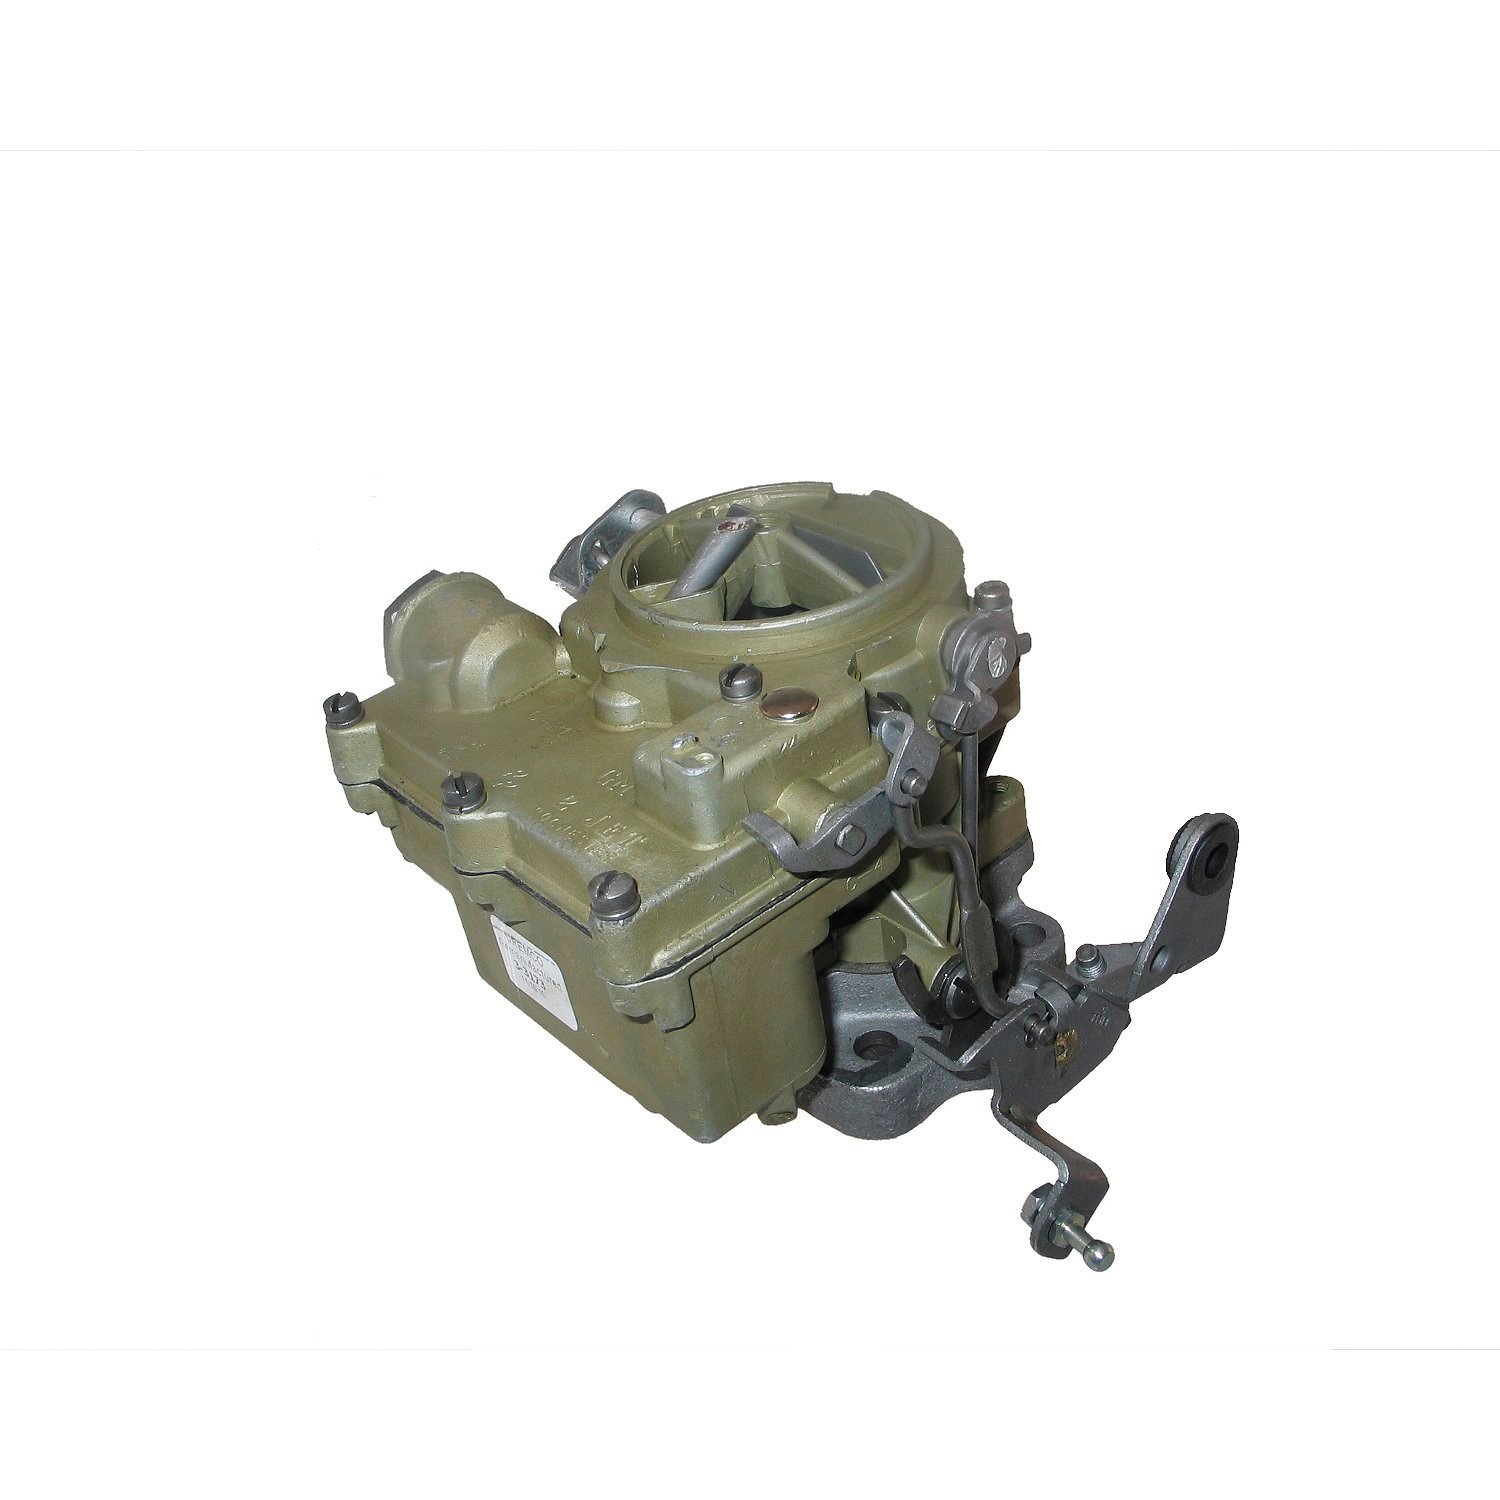 3-3173 Rochester Remanufactured Carburetor, 2GV-Style